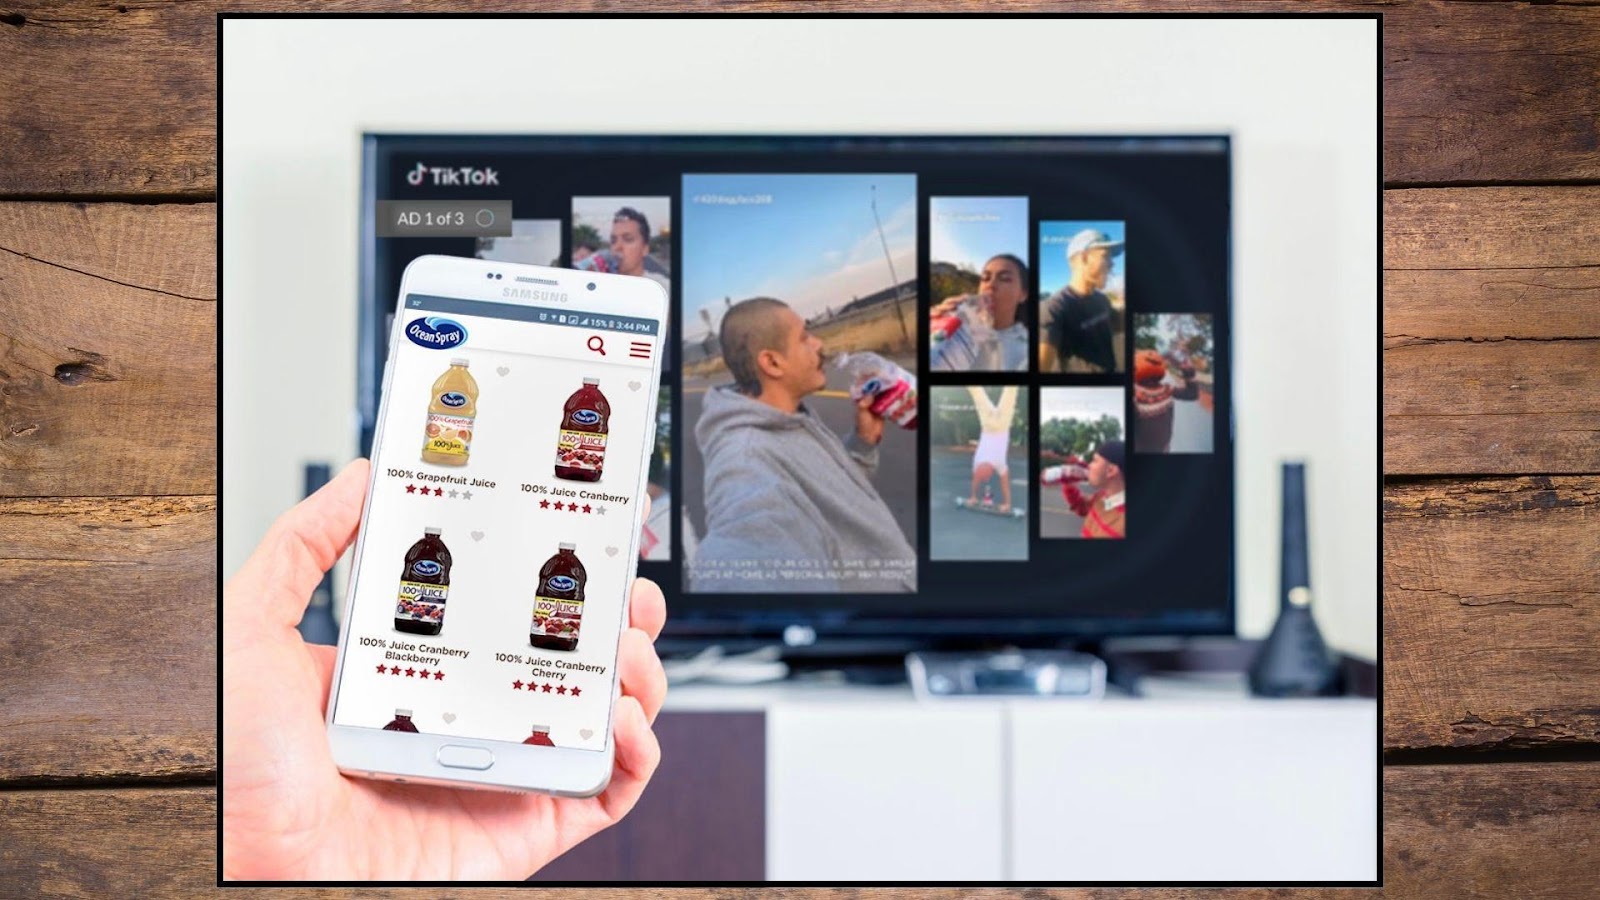 Ocean Spray turned a viral video into a branded campaign.